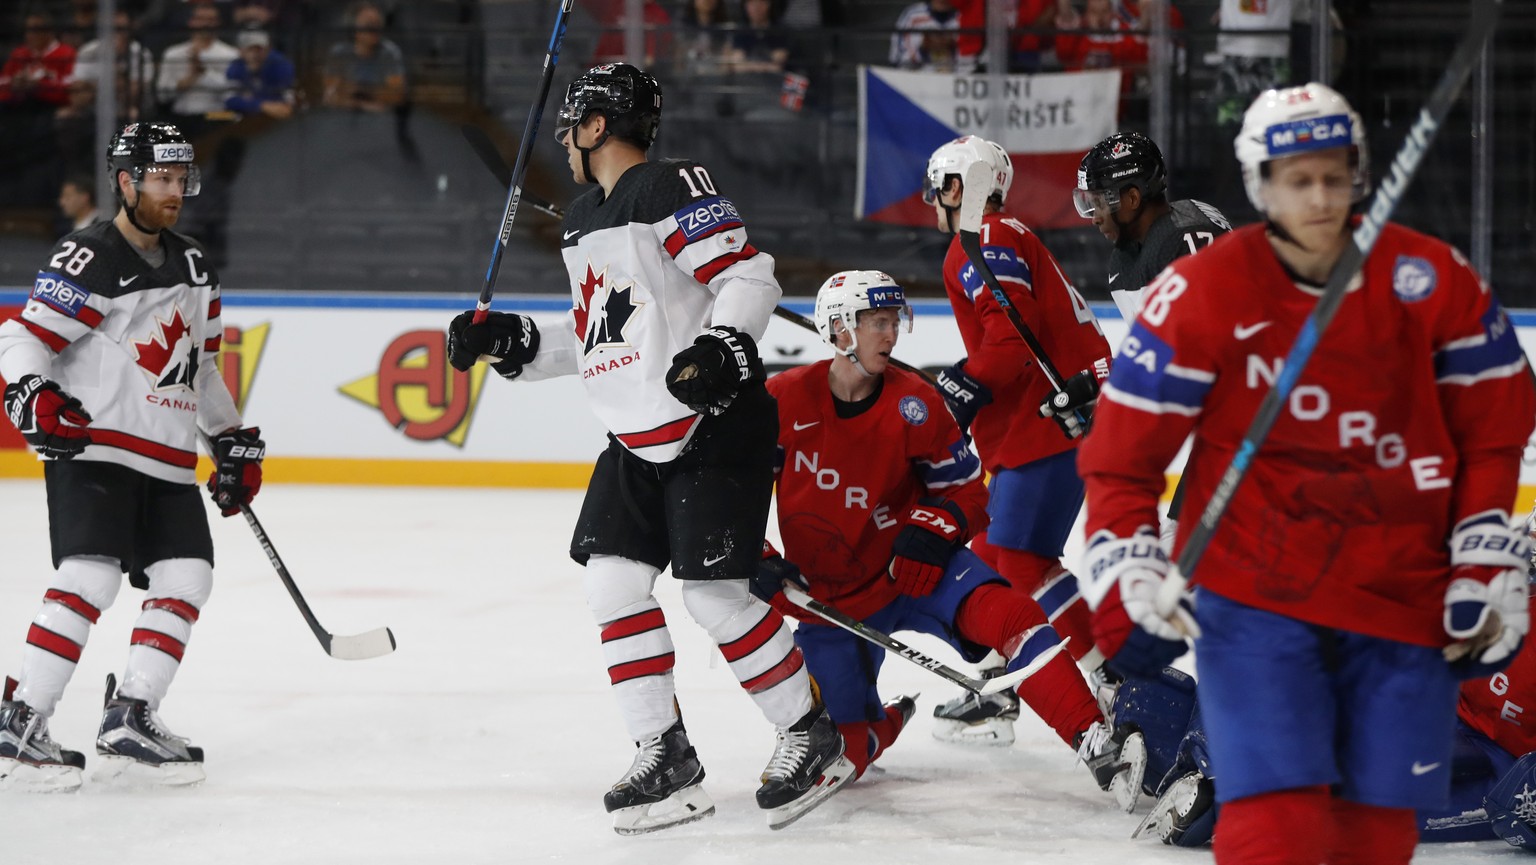 Canada&#039;s Brayden Schenn, 2nd left, celebrates with teammate Canada&#039;s Claude Giroux, left, after scoring his sides first goal during the Ice Hockey World Championships group B match between C ...